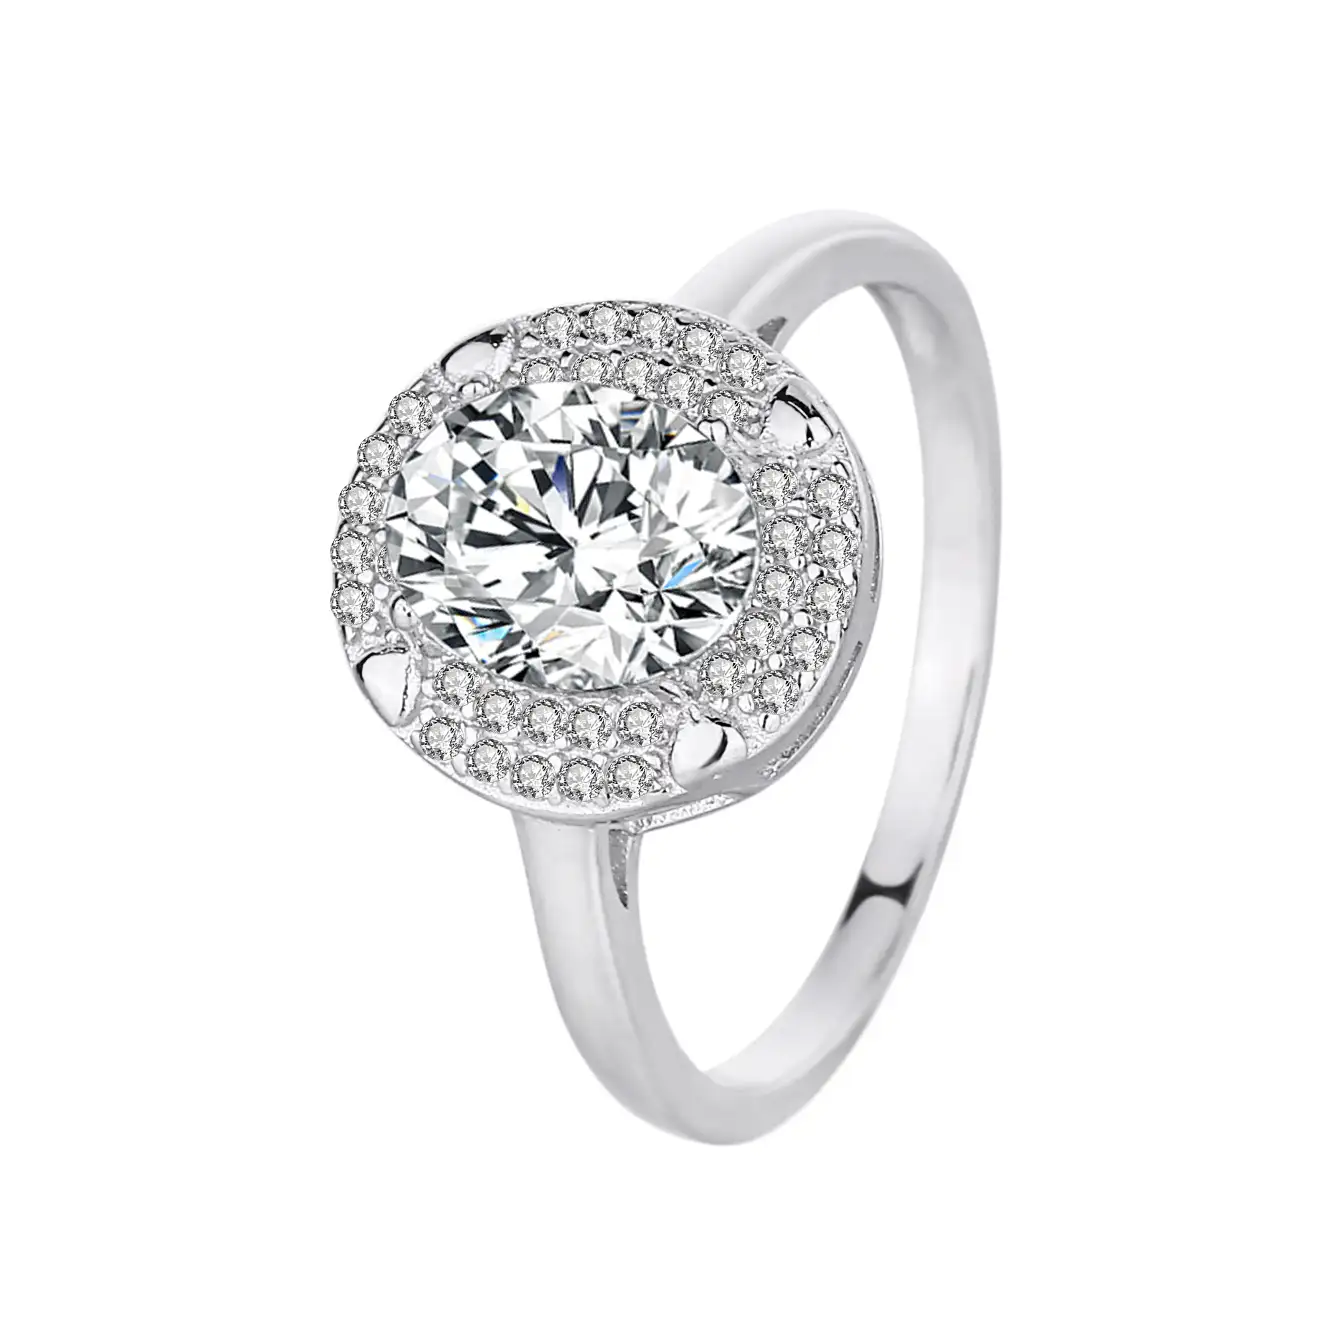 Silver Cubic Zirconia Solitaire Ring 70200042